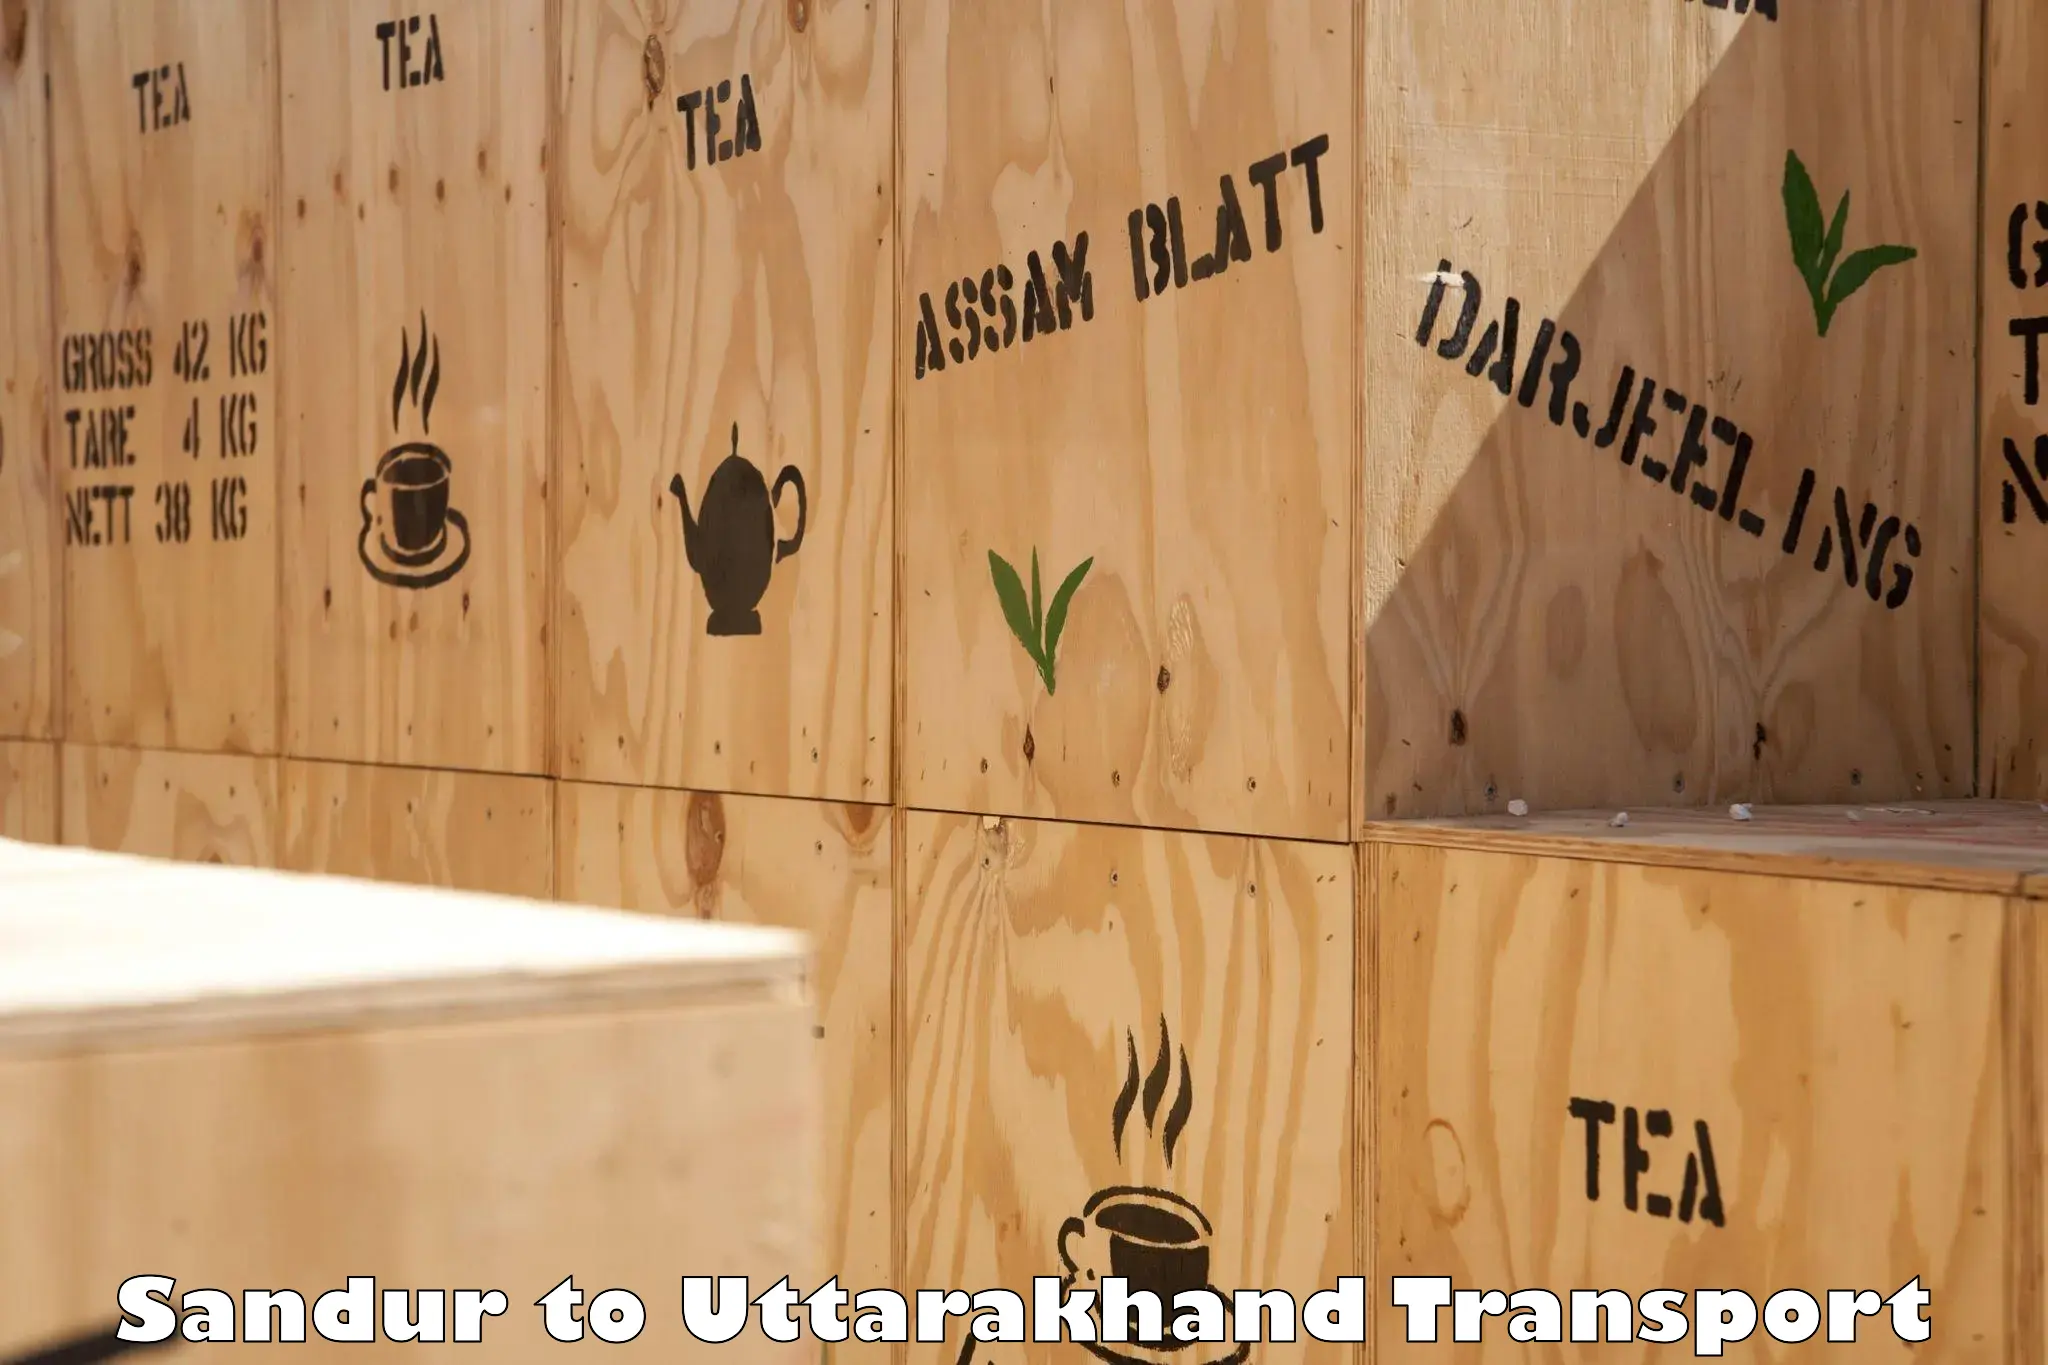 Transport bike from one state to another Sandur to Uttarakhand